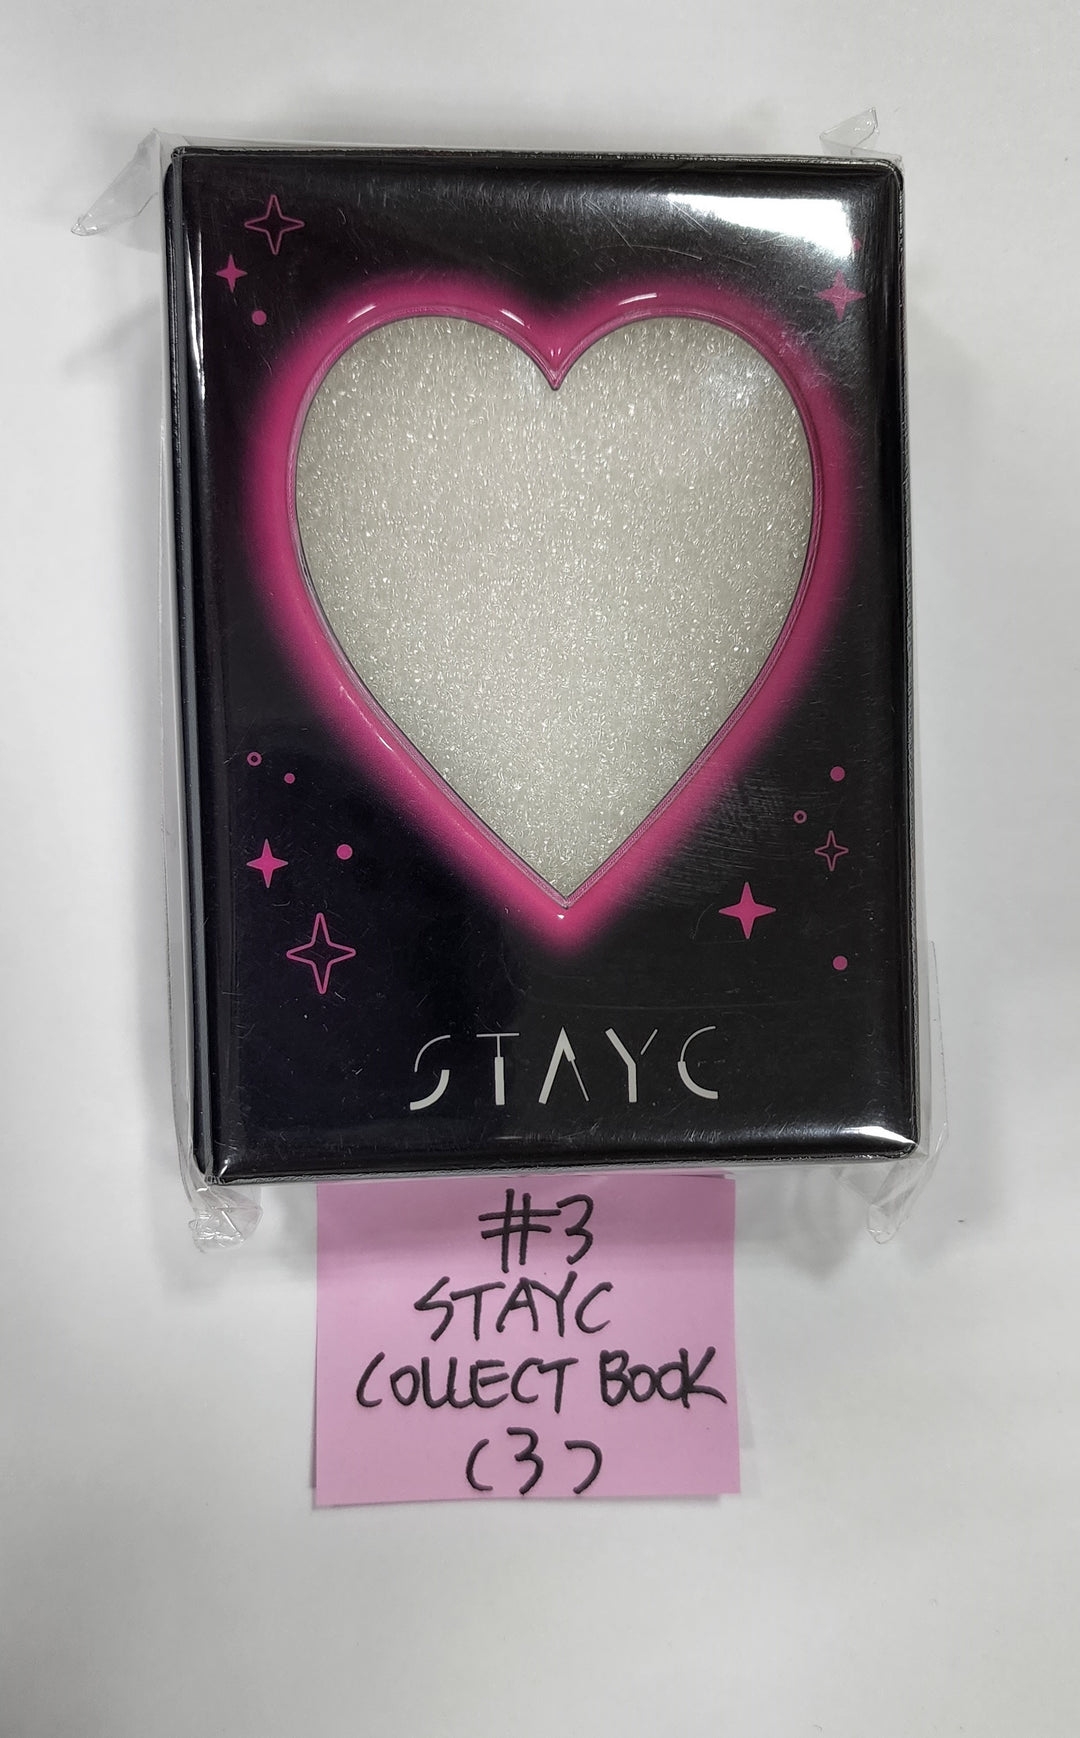 STAYC "YOUNG-LUV.COM" - 공식 MD